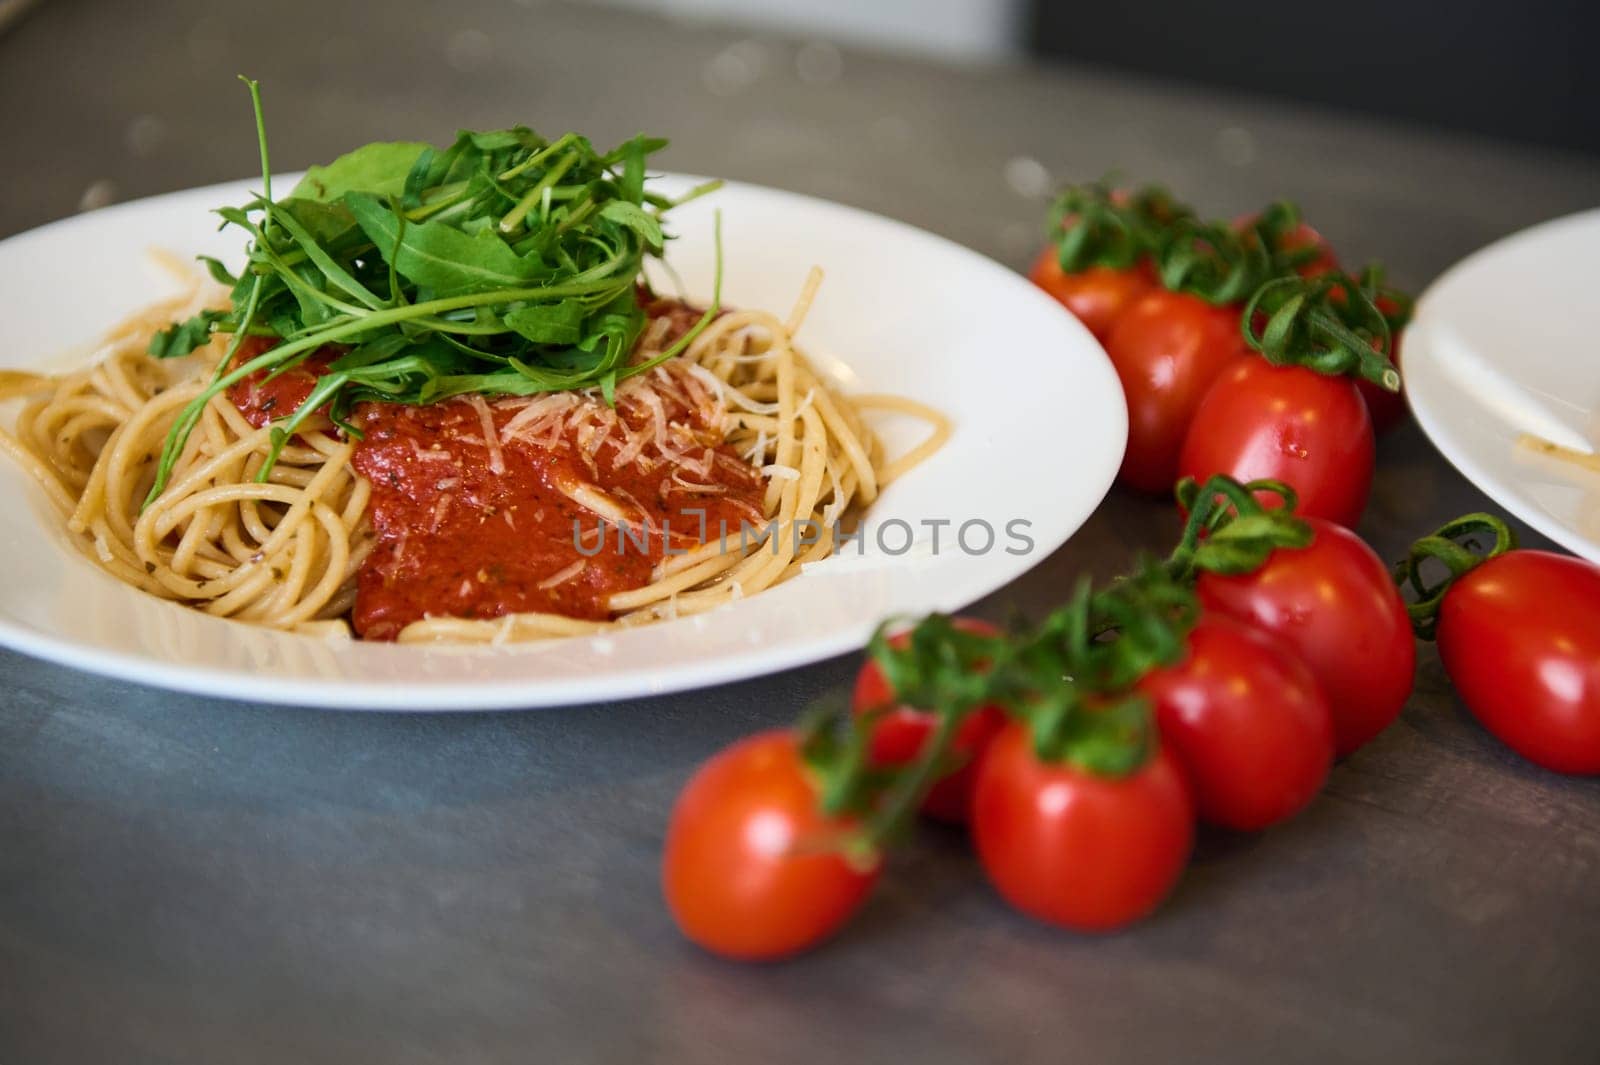 Food background. Still life with a white plate with Italian spaghetti capellini with tomato sauce, garnished with arugula green leaves and branch of red ripe organic tomatoes on the gray kitchen table